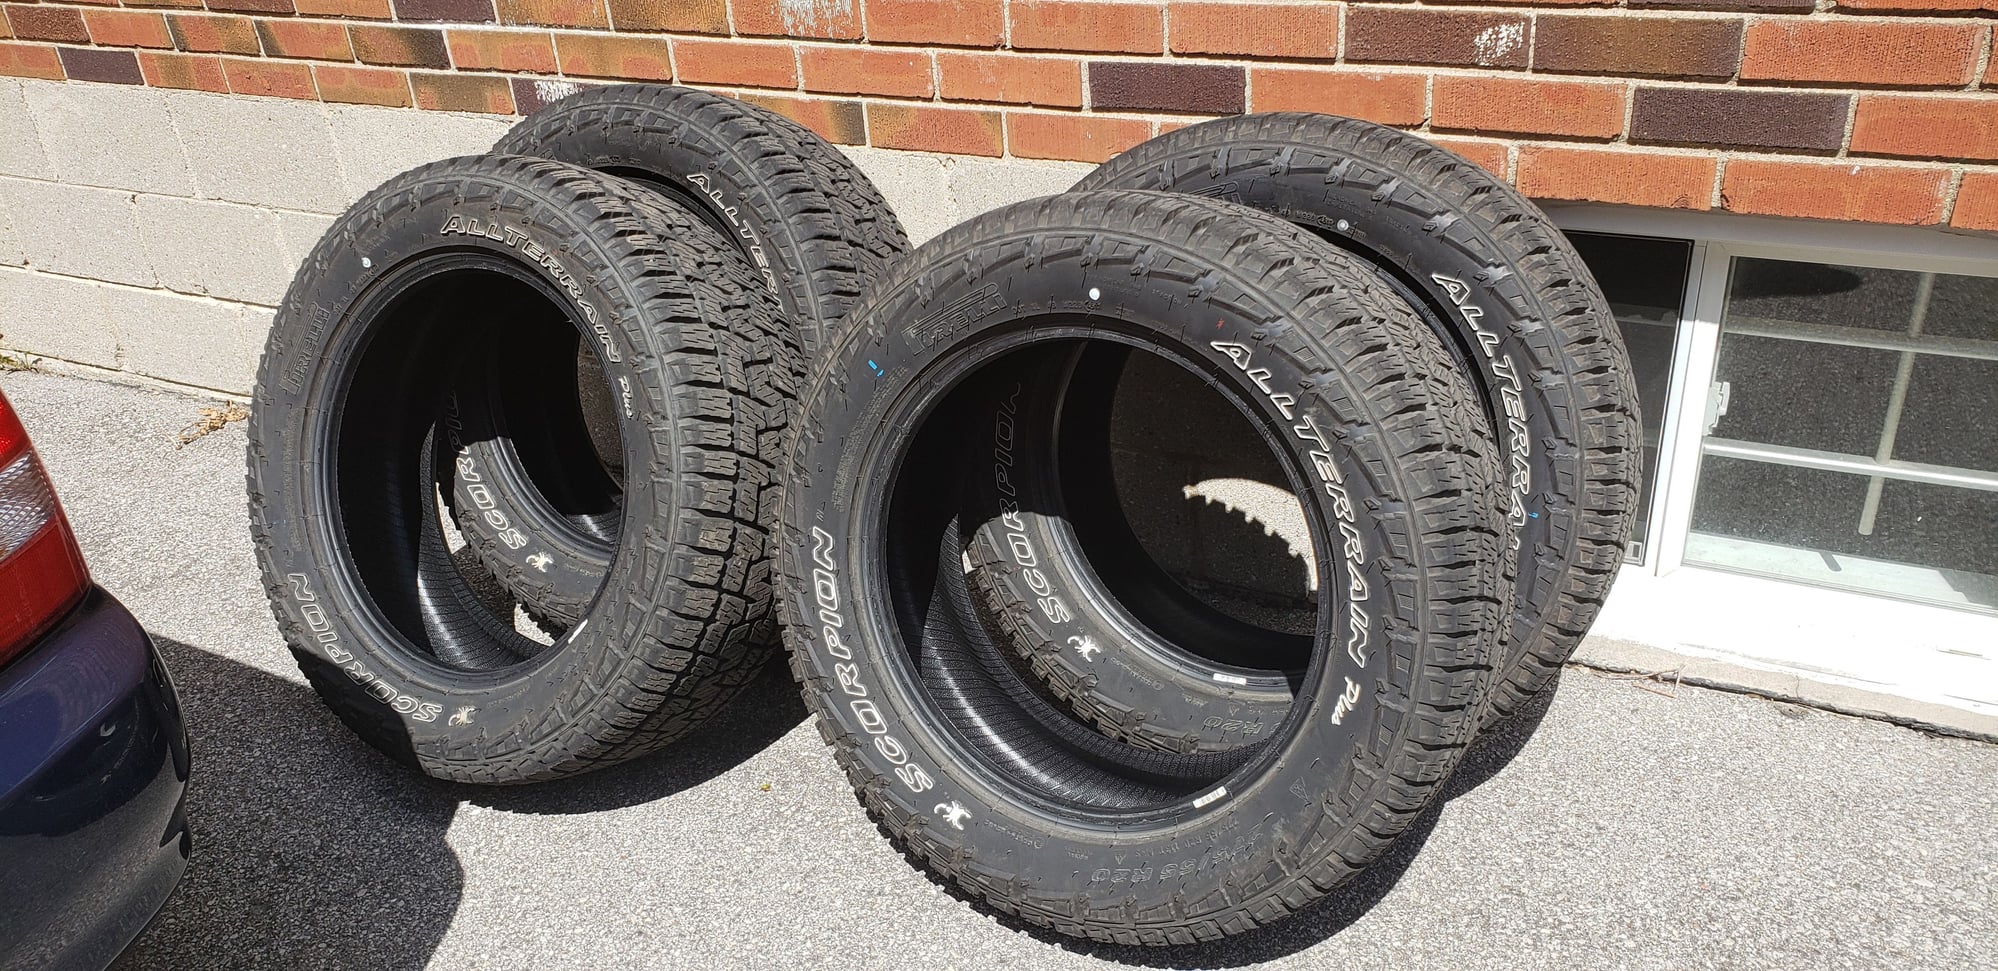 Good replacement tires? - Page 5 - Ford F150 Forum - Community of Ford  Truck Fans